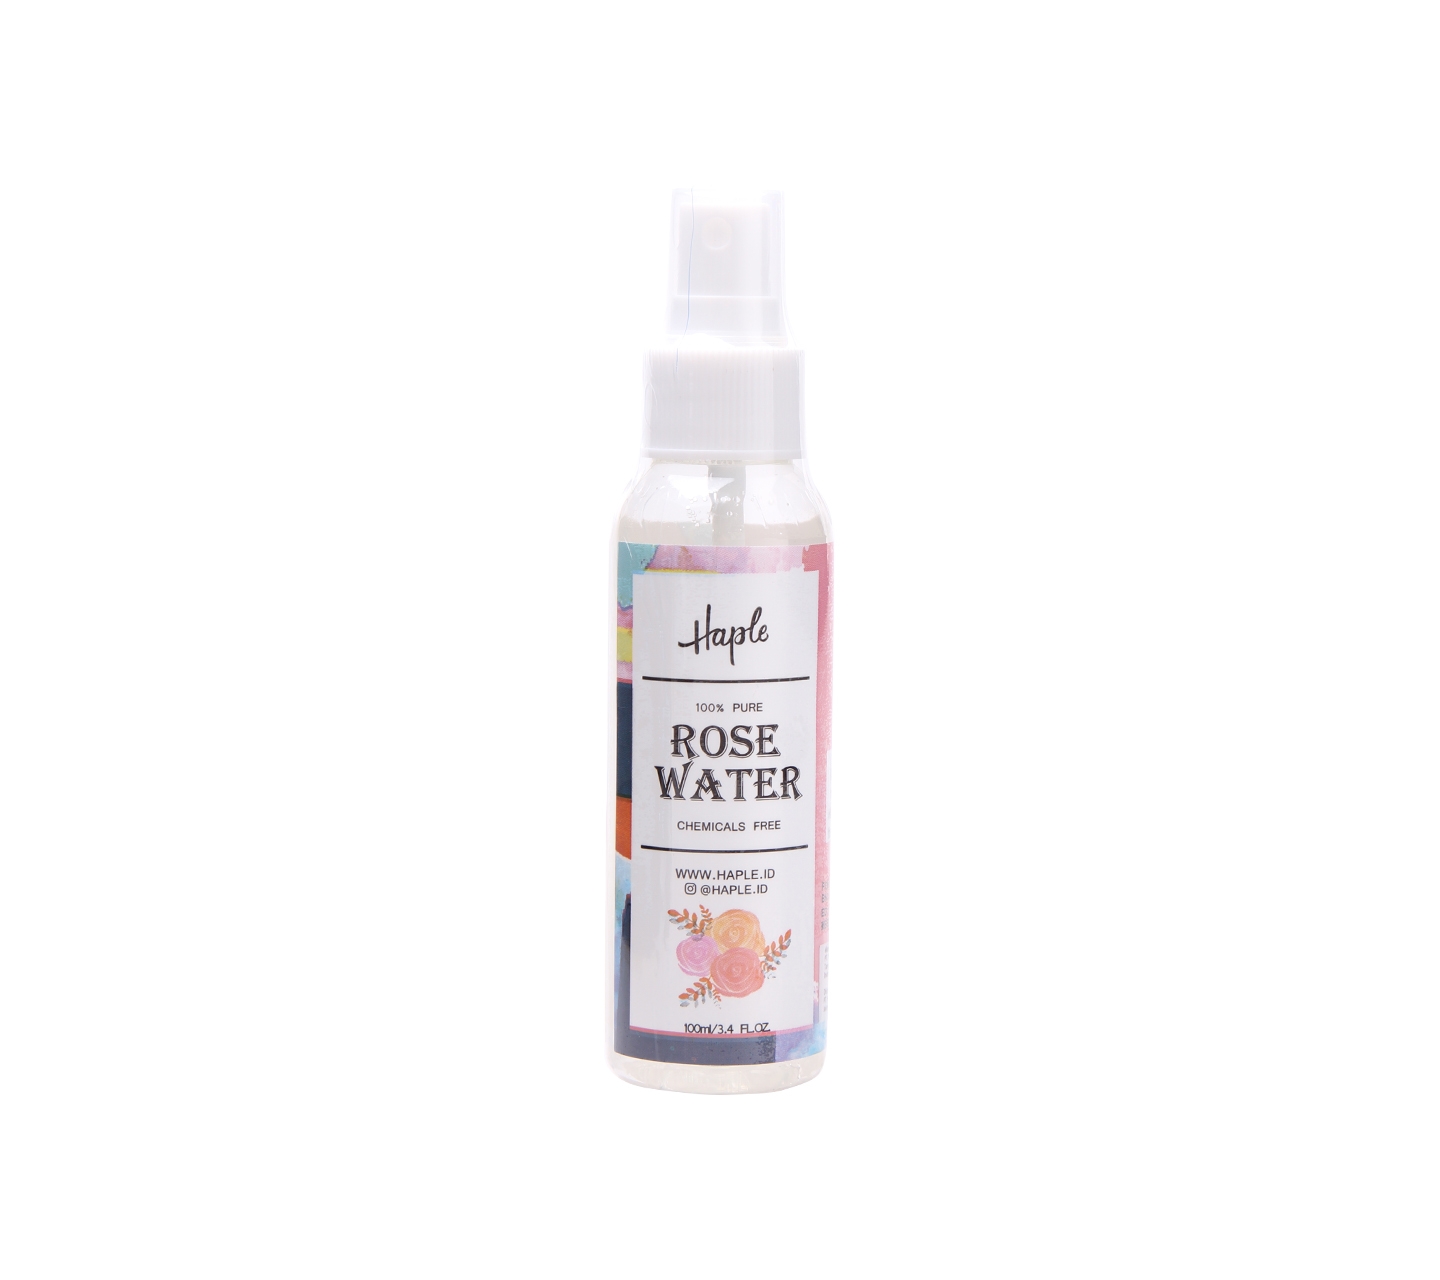 Haple Rose Water Chemicals Free Faces